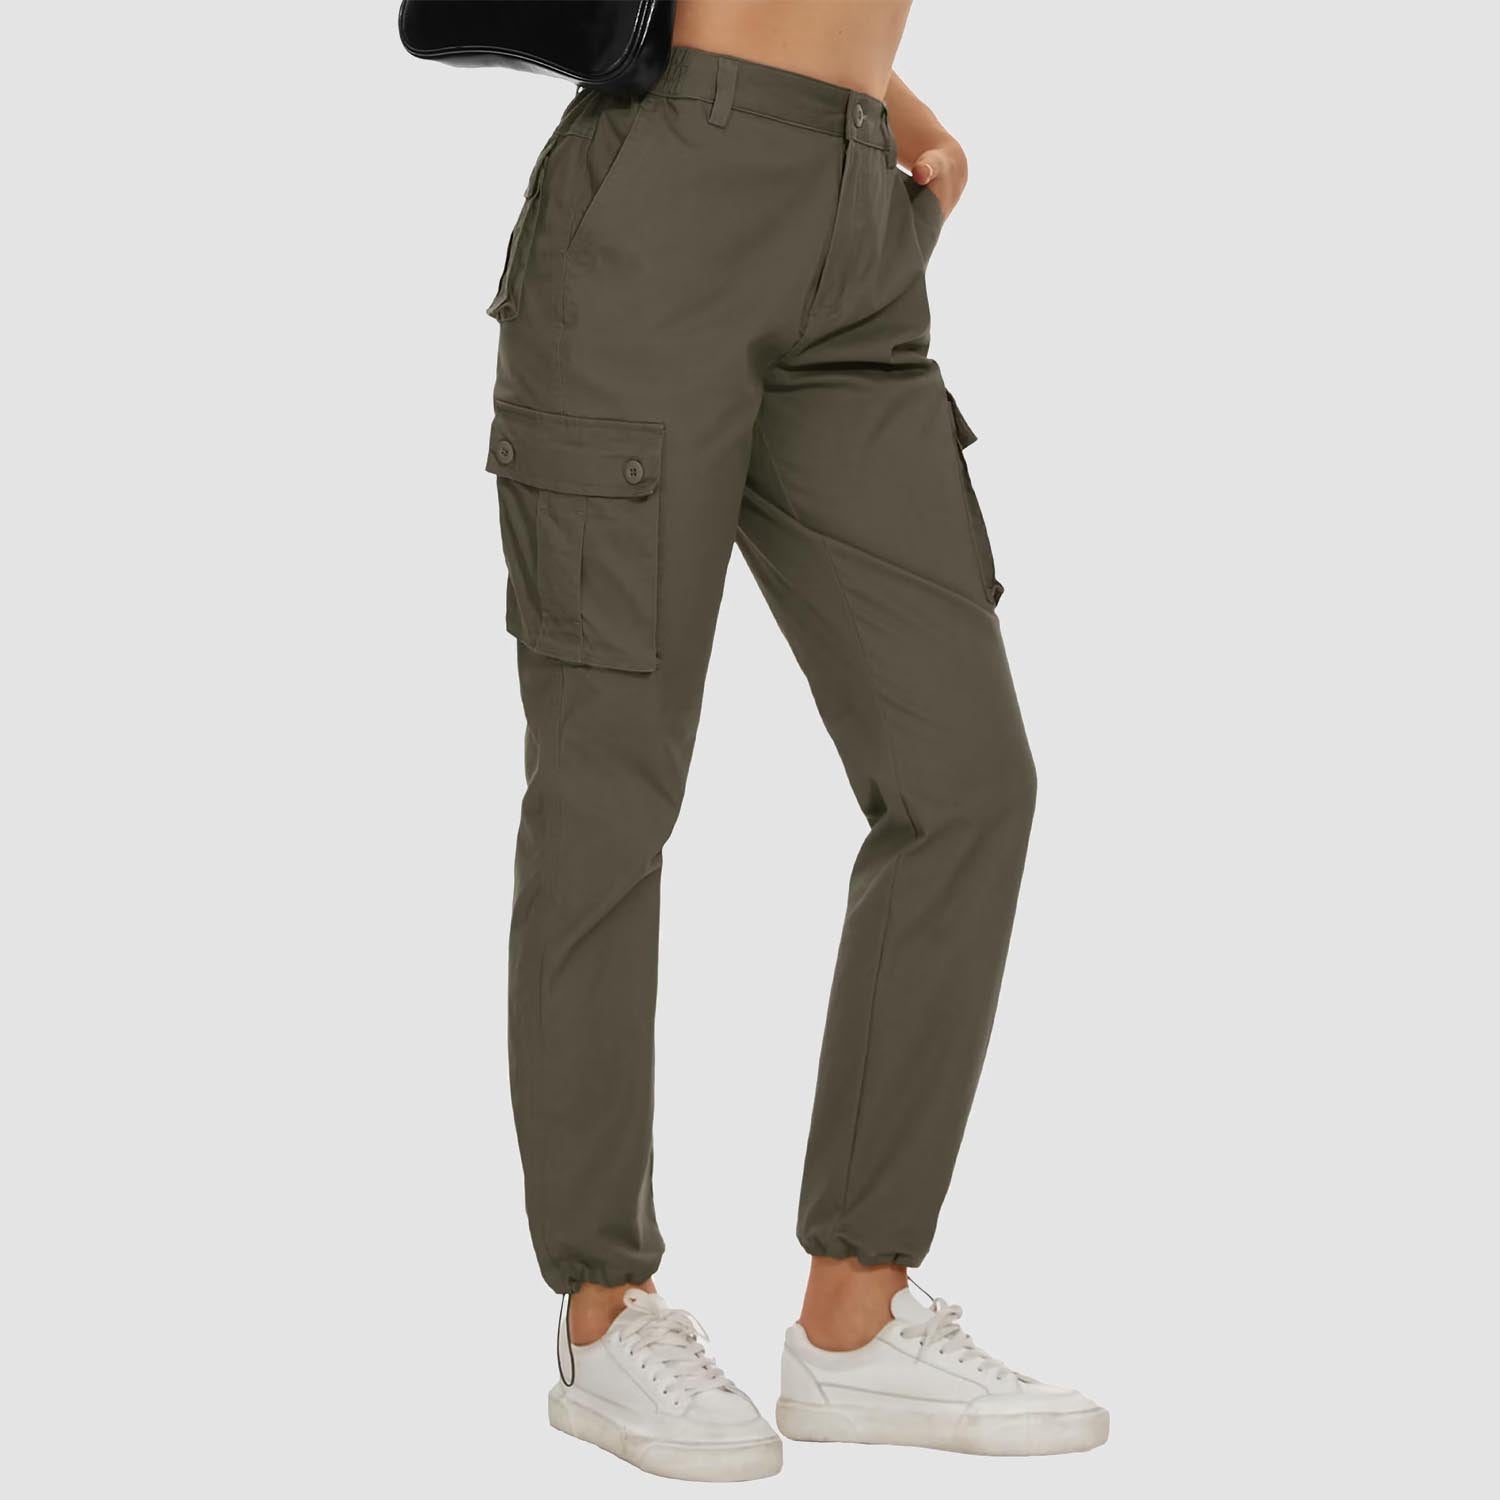 Women's Cargo Pants Cotton Work Pants Casual Stylish Elastic Military  Trousers